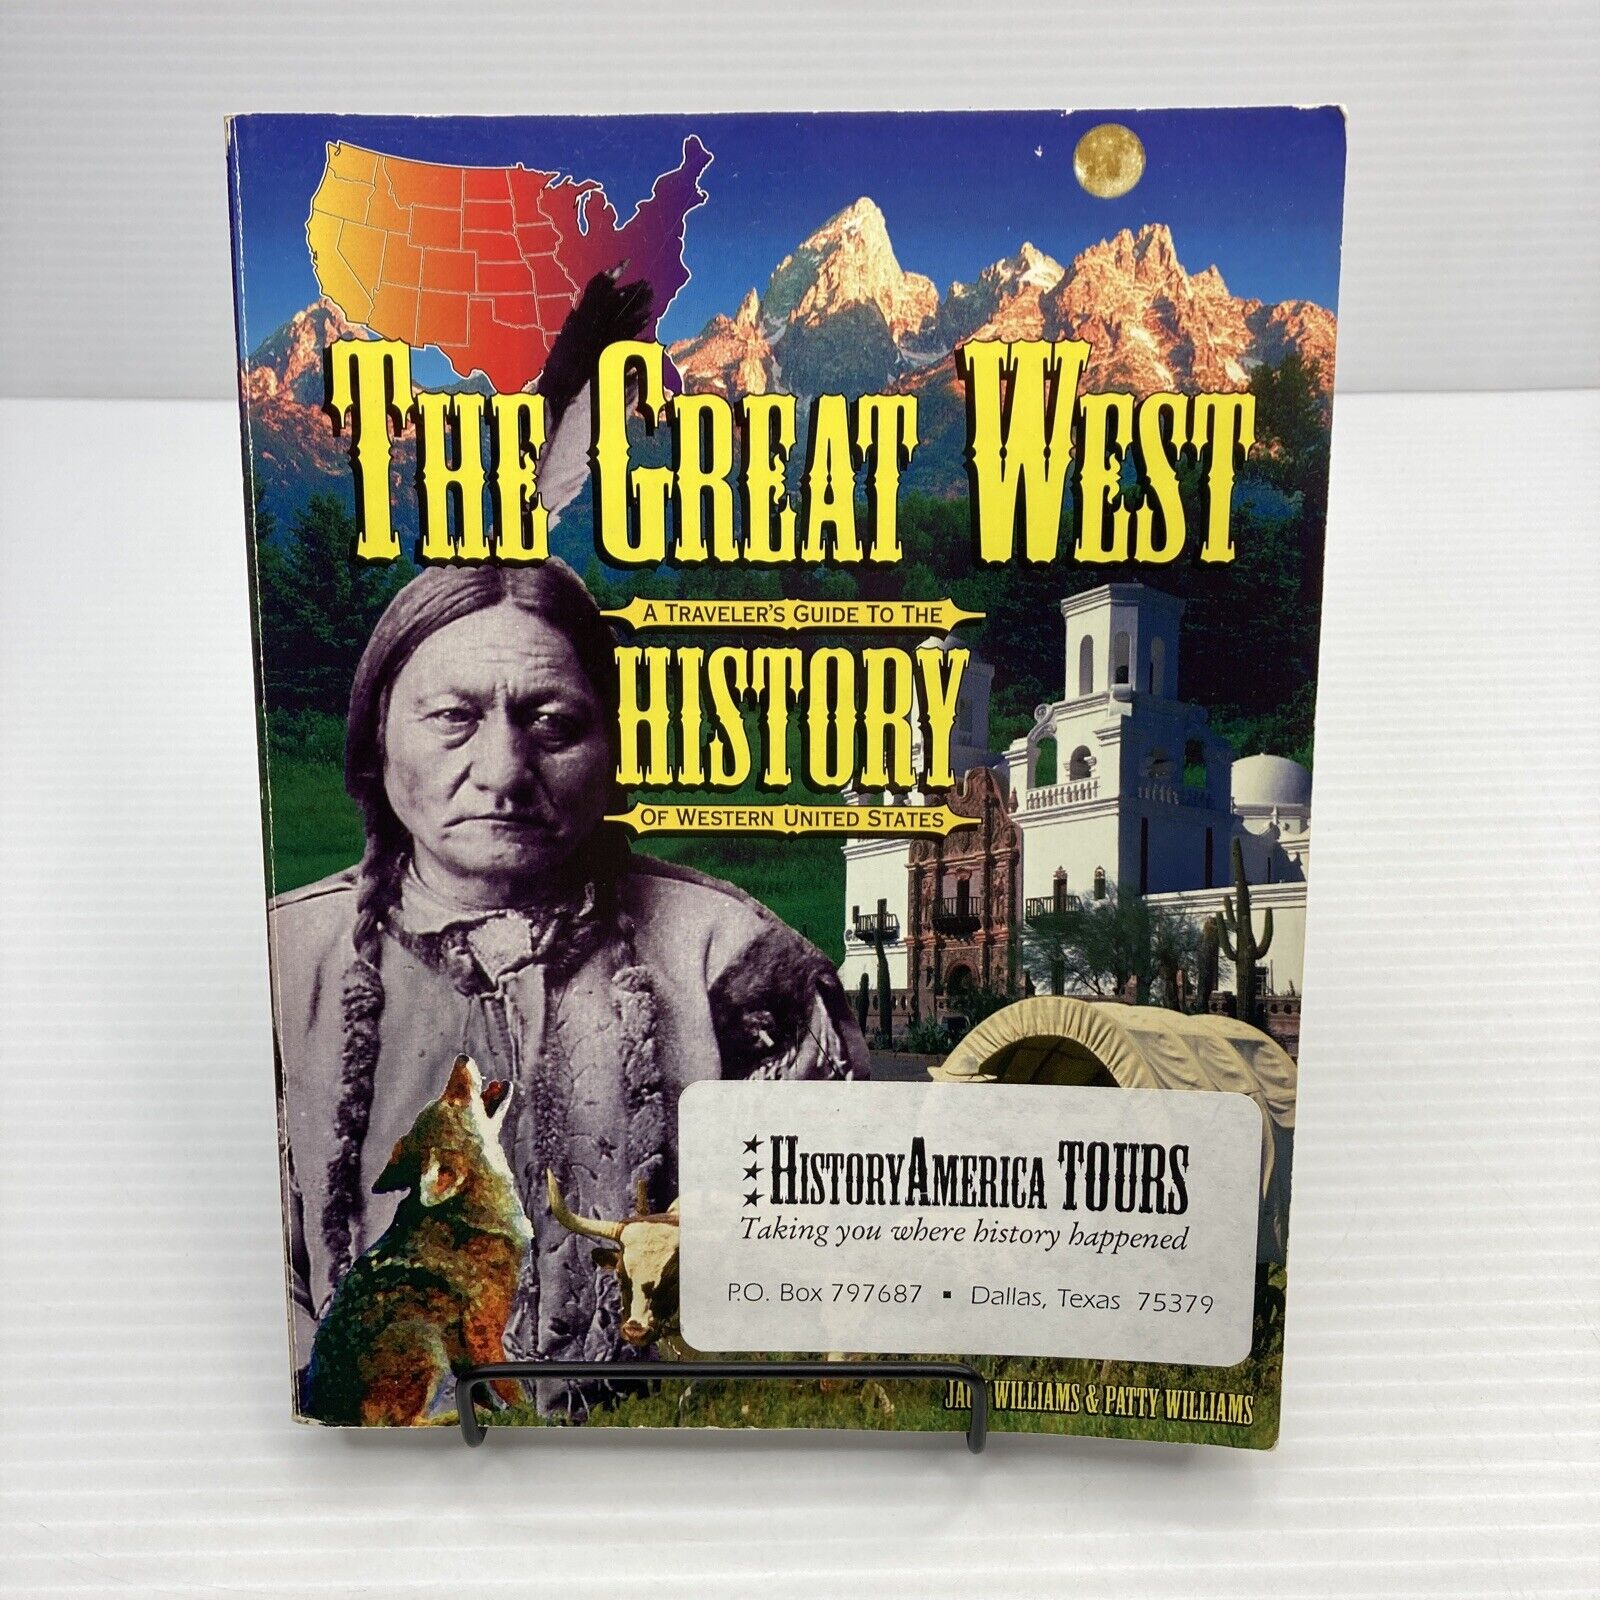 The Great West A Traveler's Guide to the History of Western United States PB